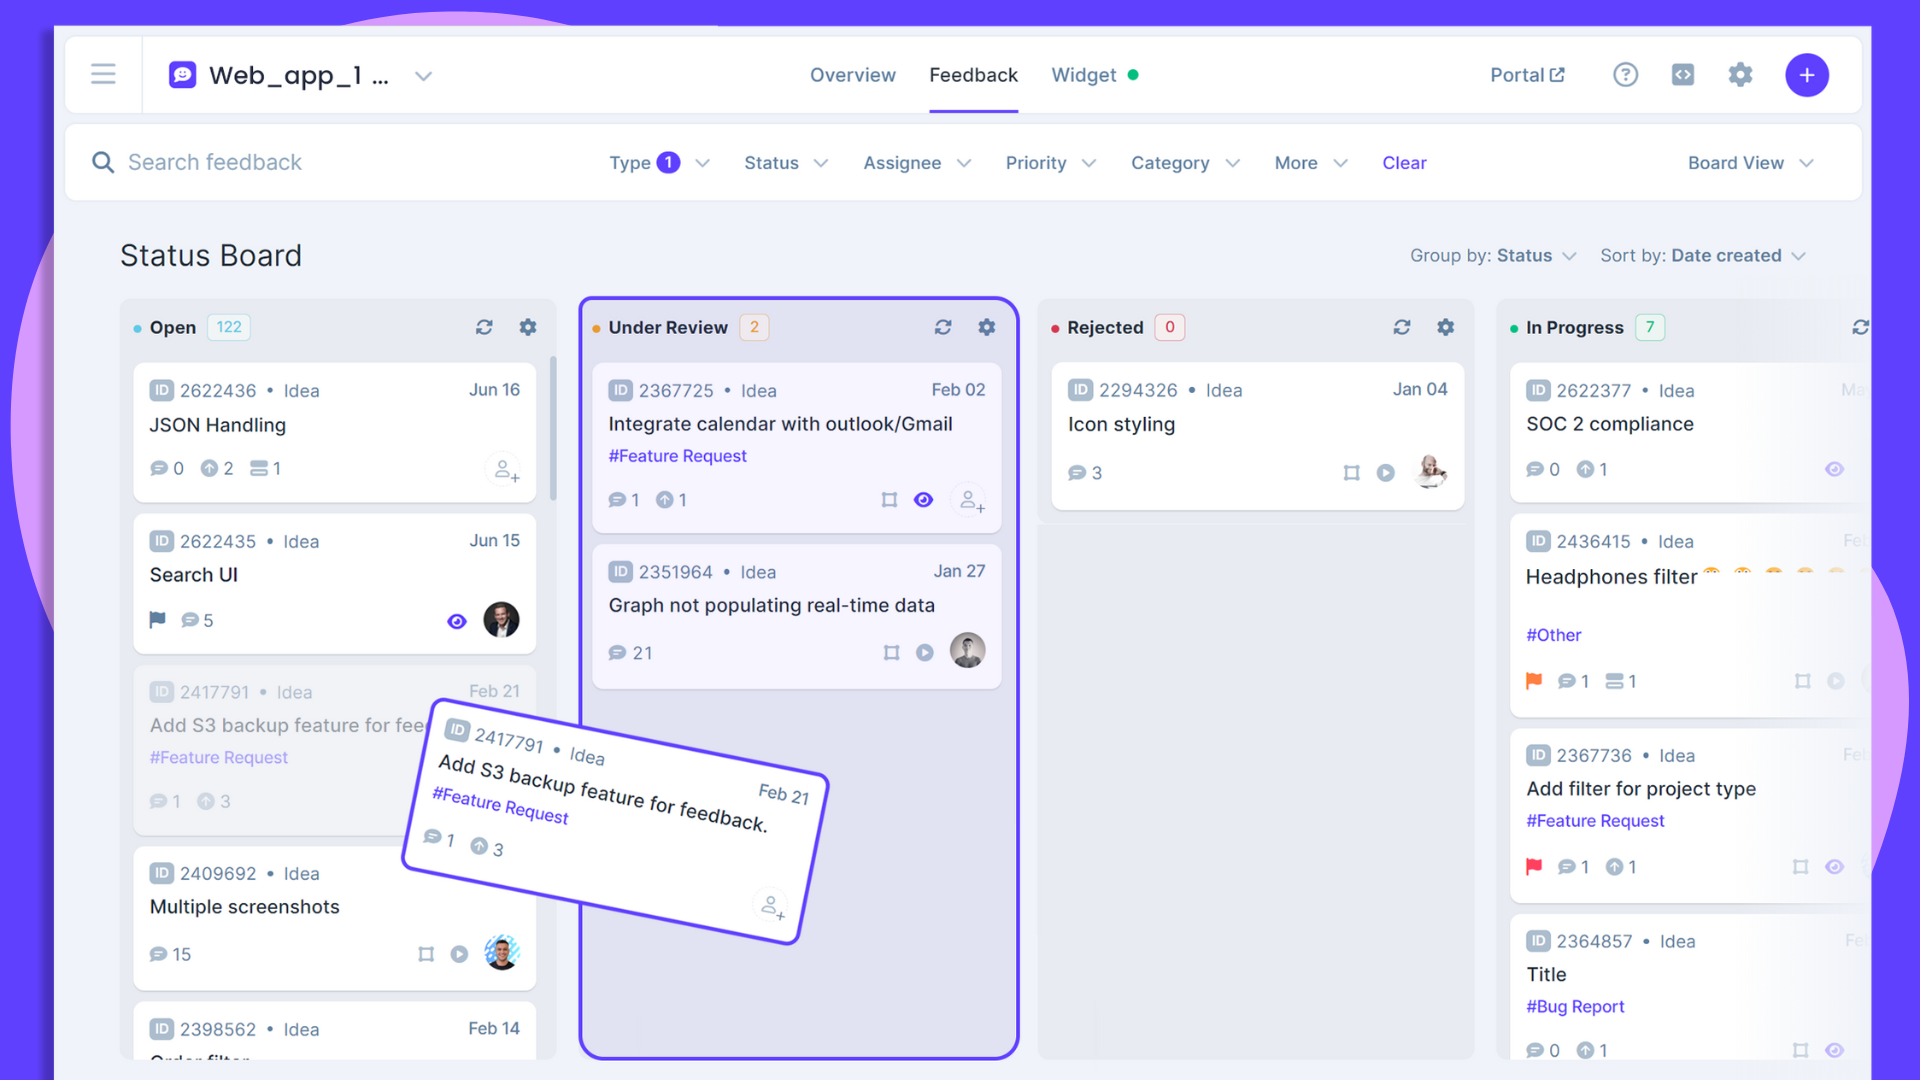 Manage it all in one beautiful home for all your user insights. Reduce feedback management overhead by 70% and improve time to closure by 10X with standardized, centralized feedback and helpful integrations.